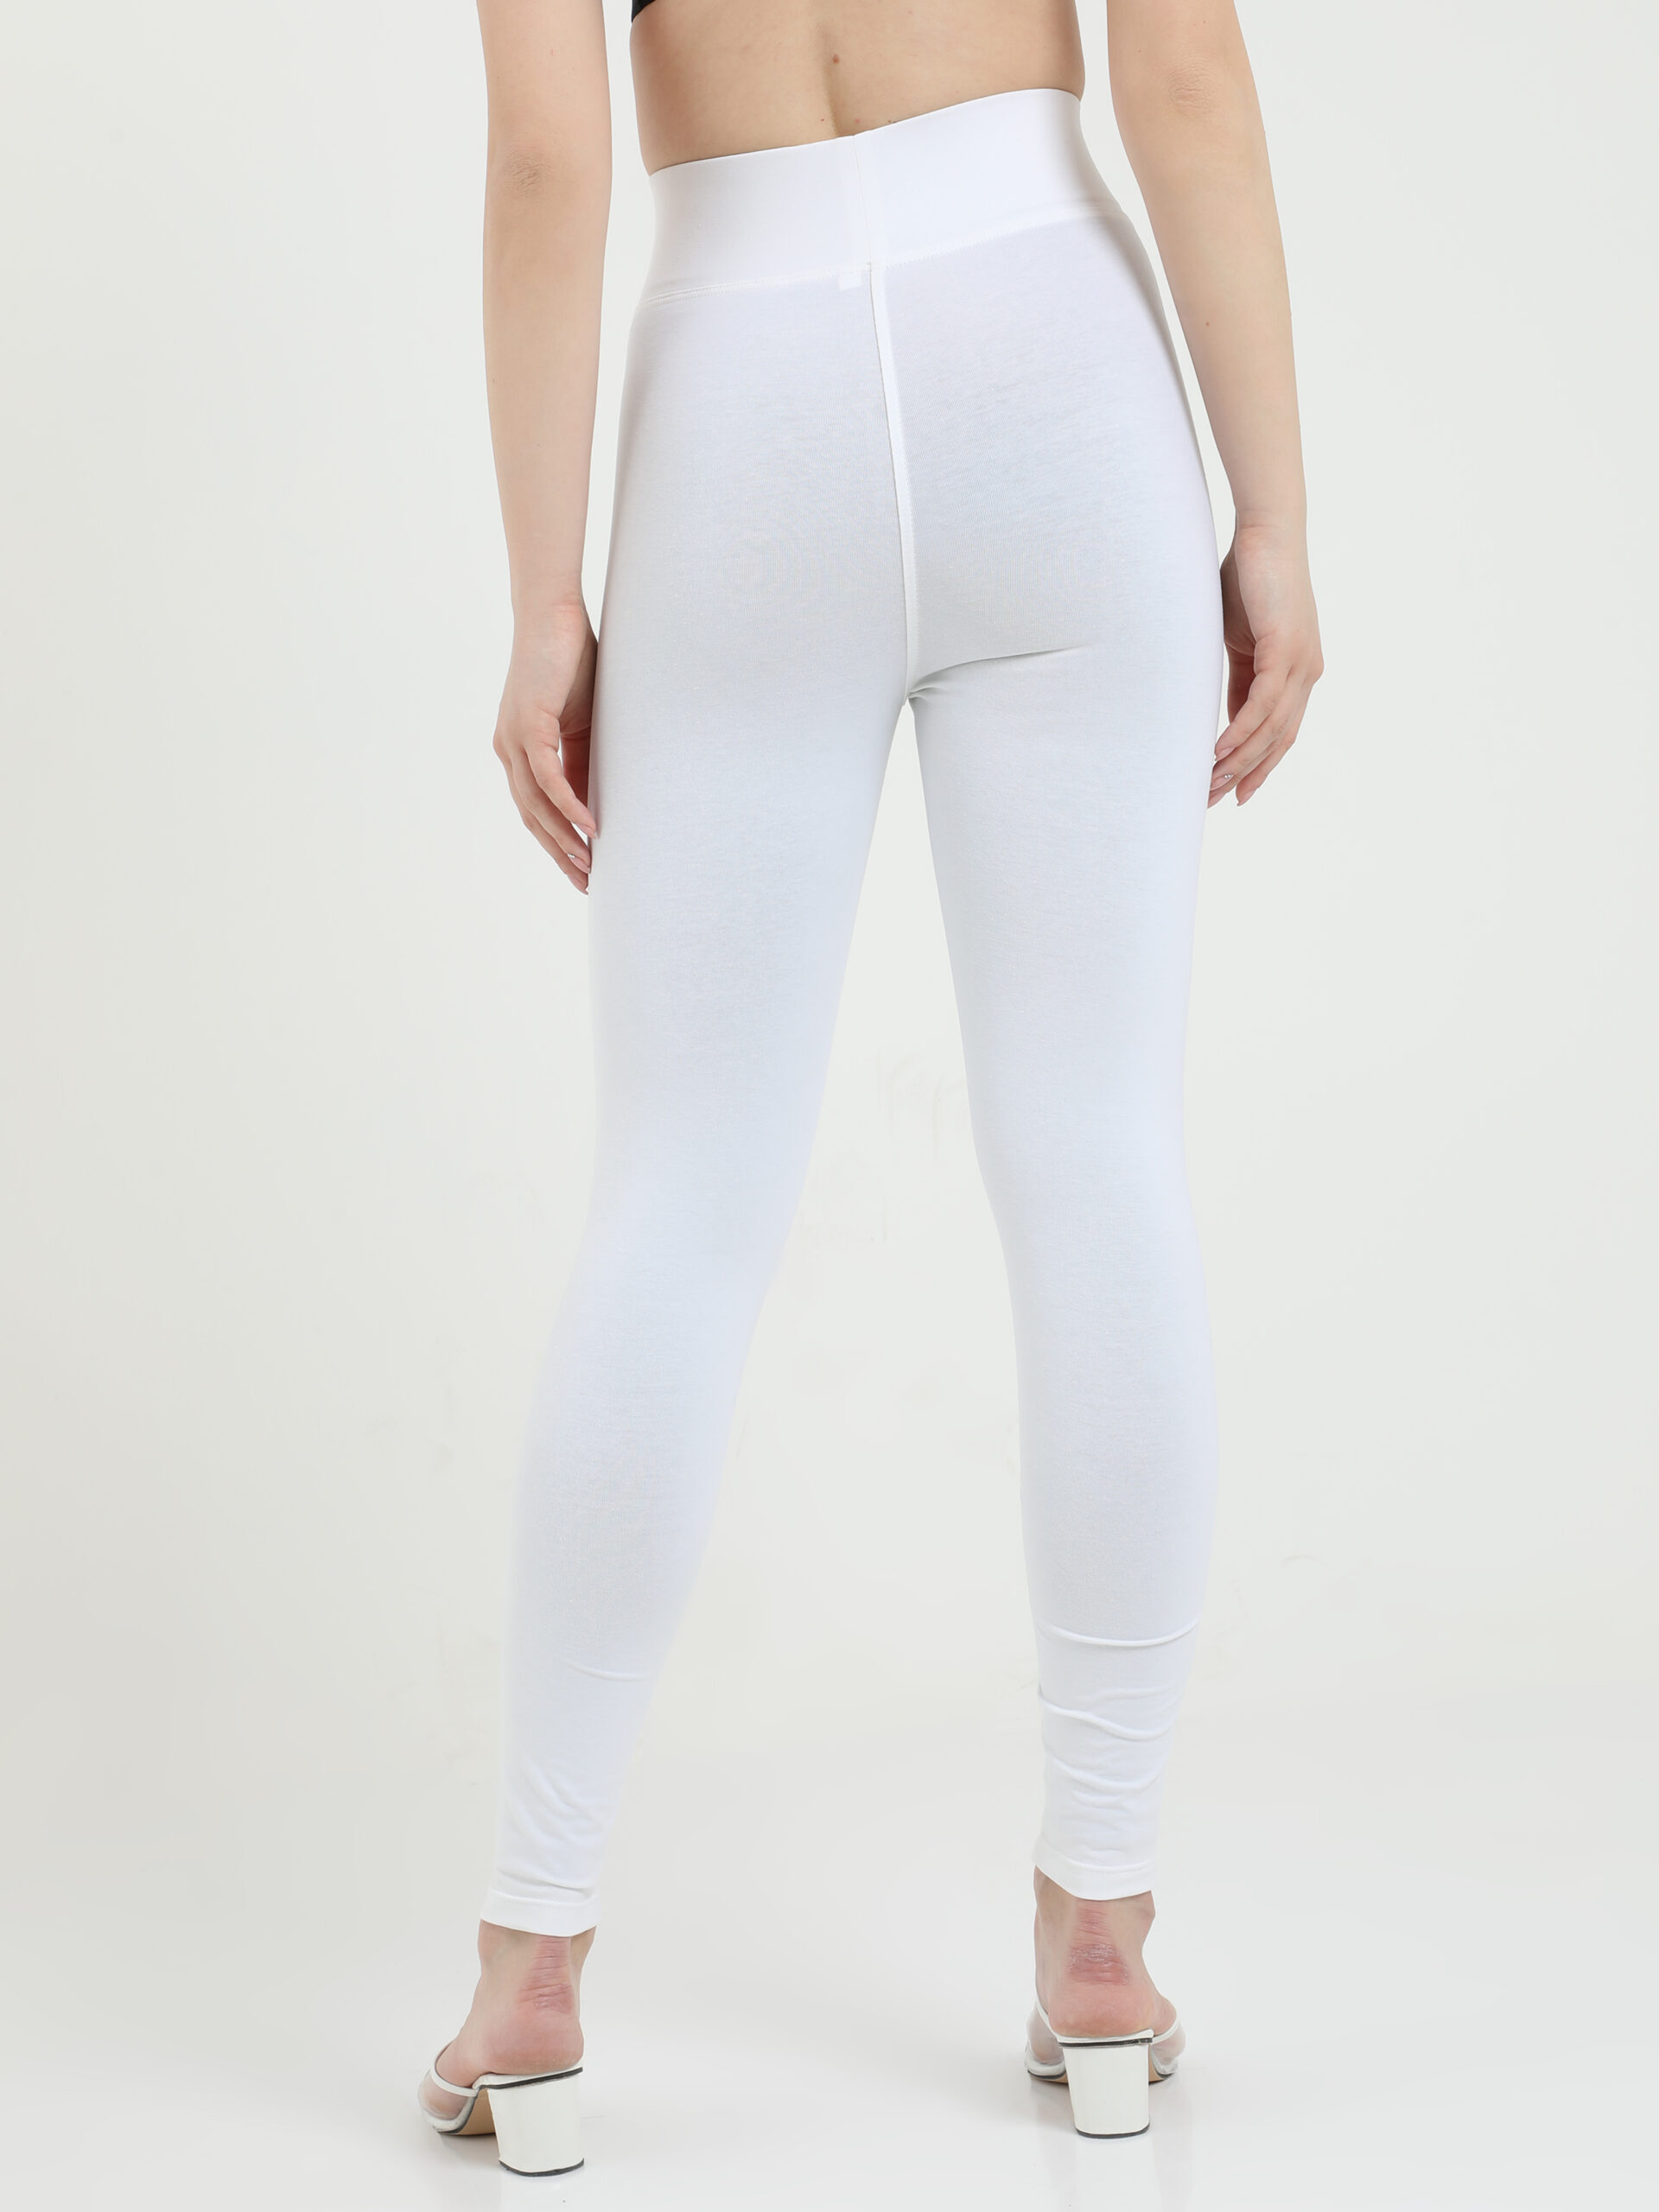 White Compression High Elastic Quick-Drying Leggings Sports